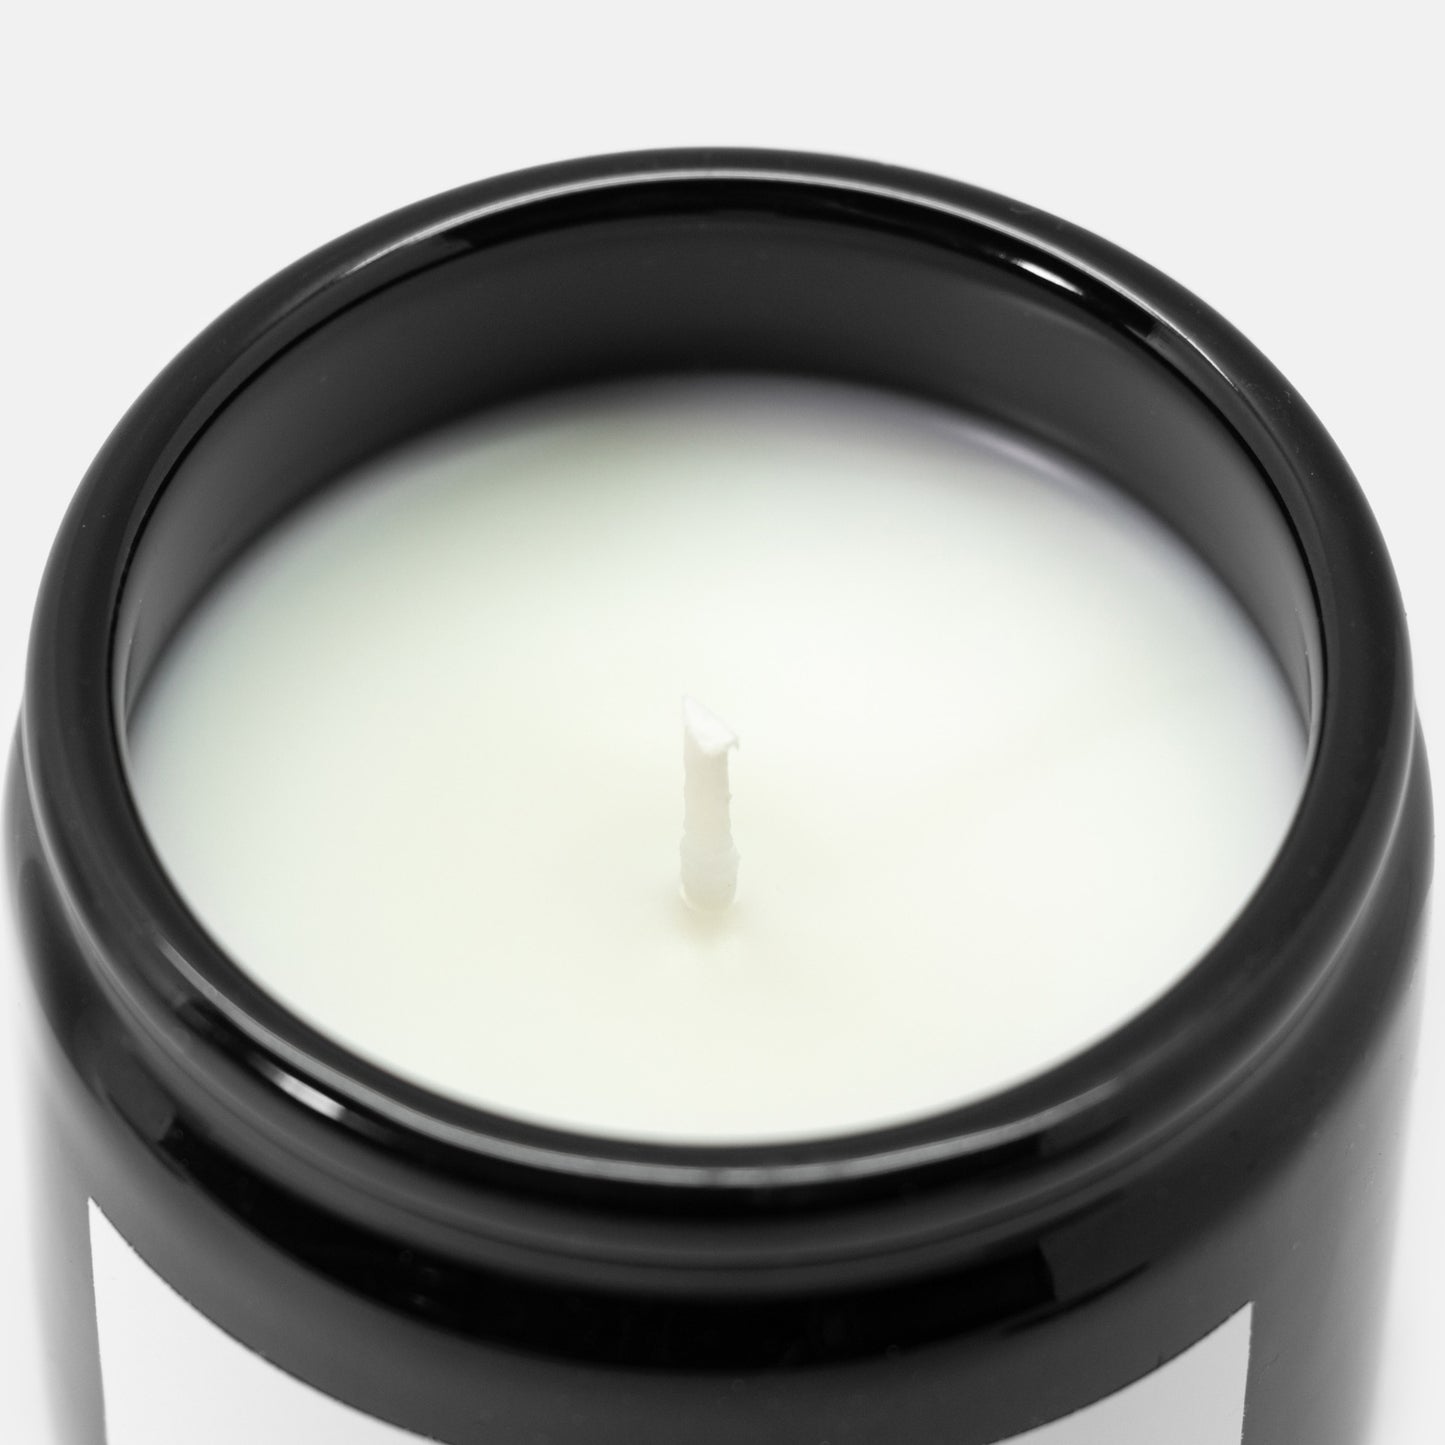 All Babes Are Beautiful - Ceramic 8oz Candle (Black)